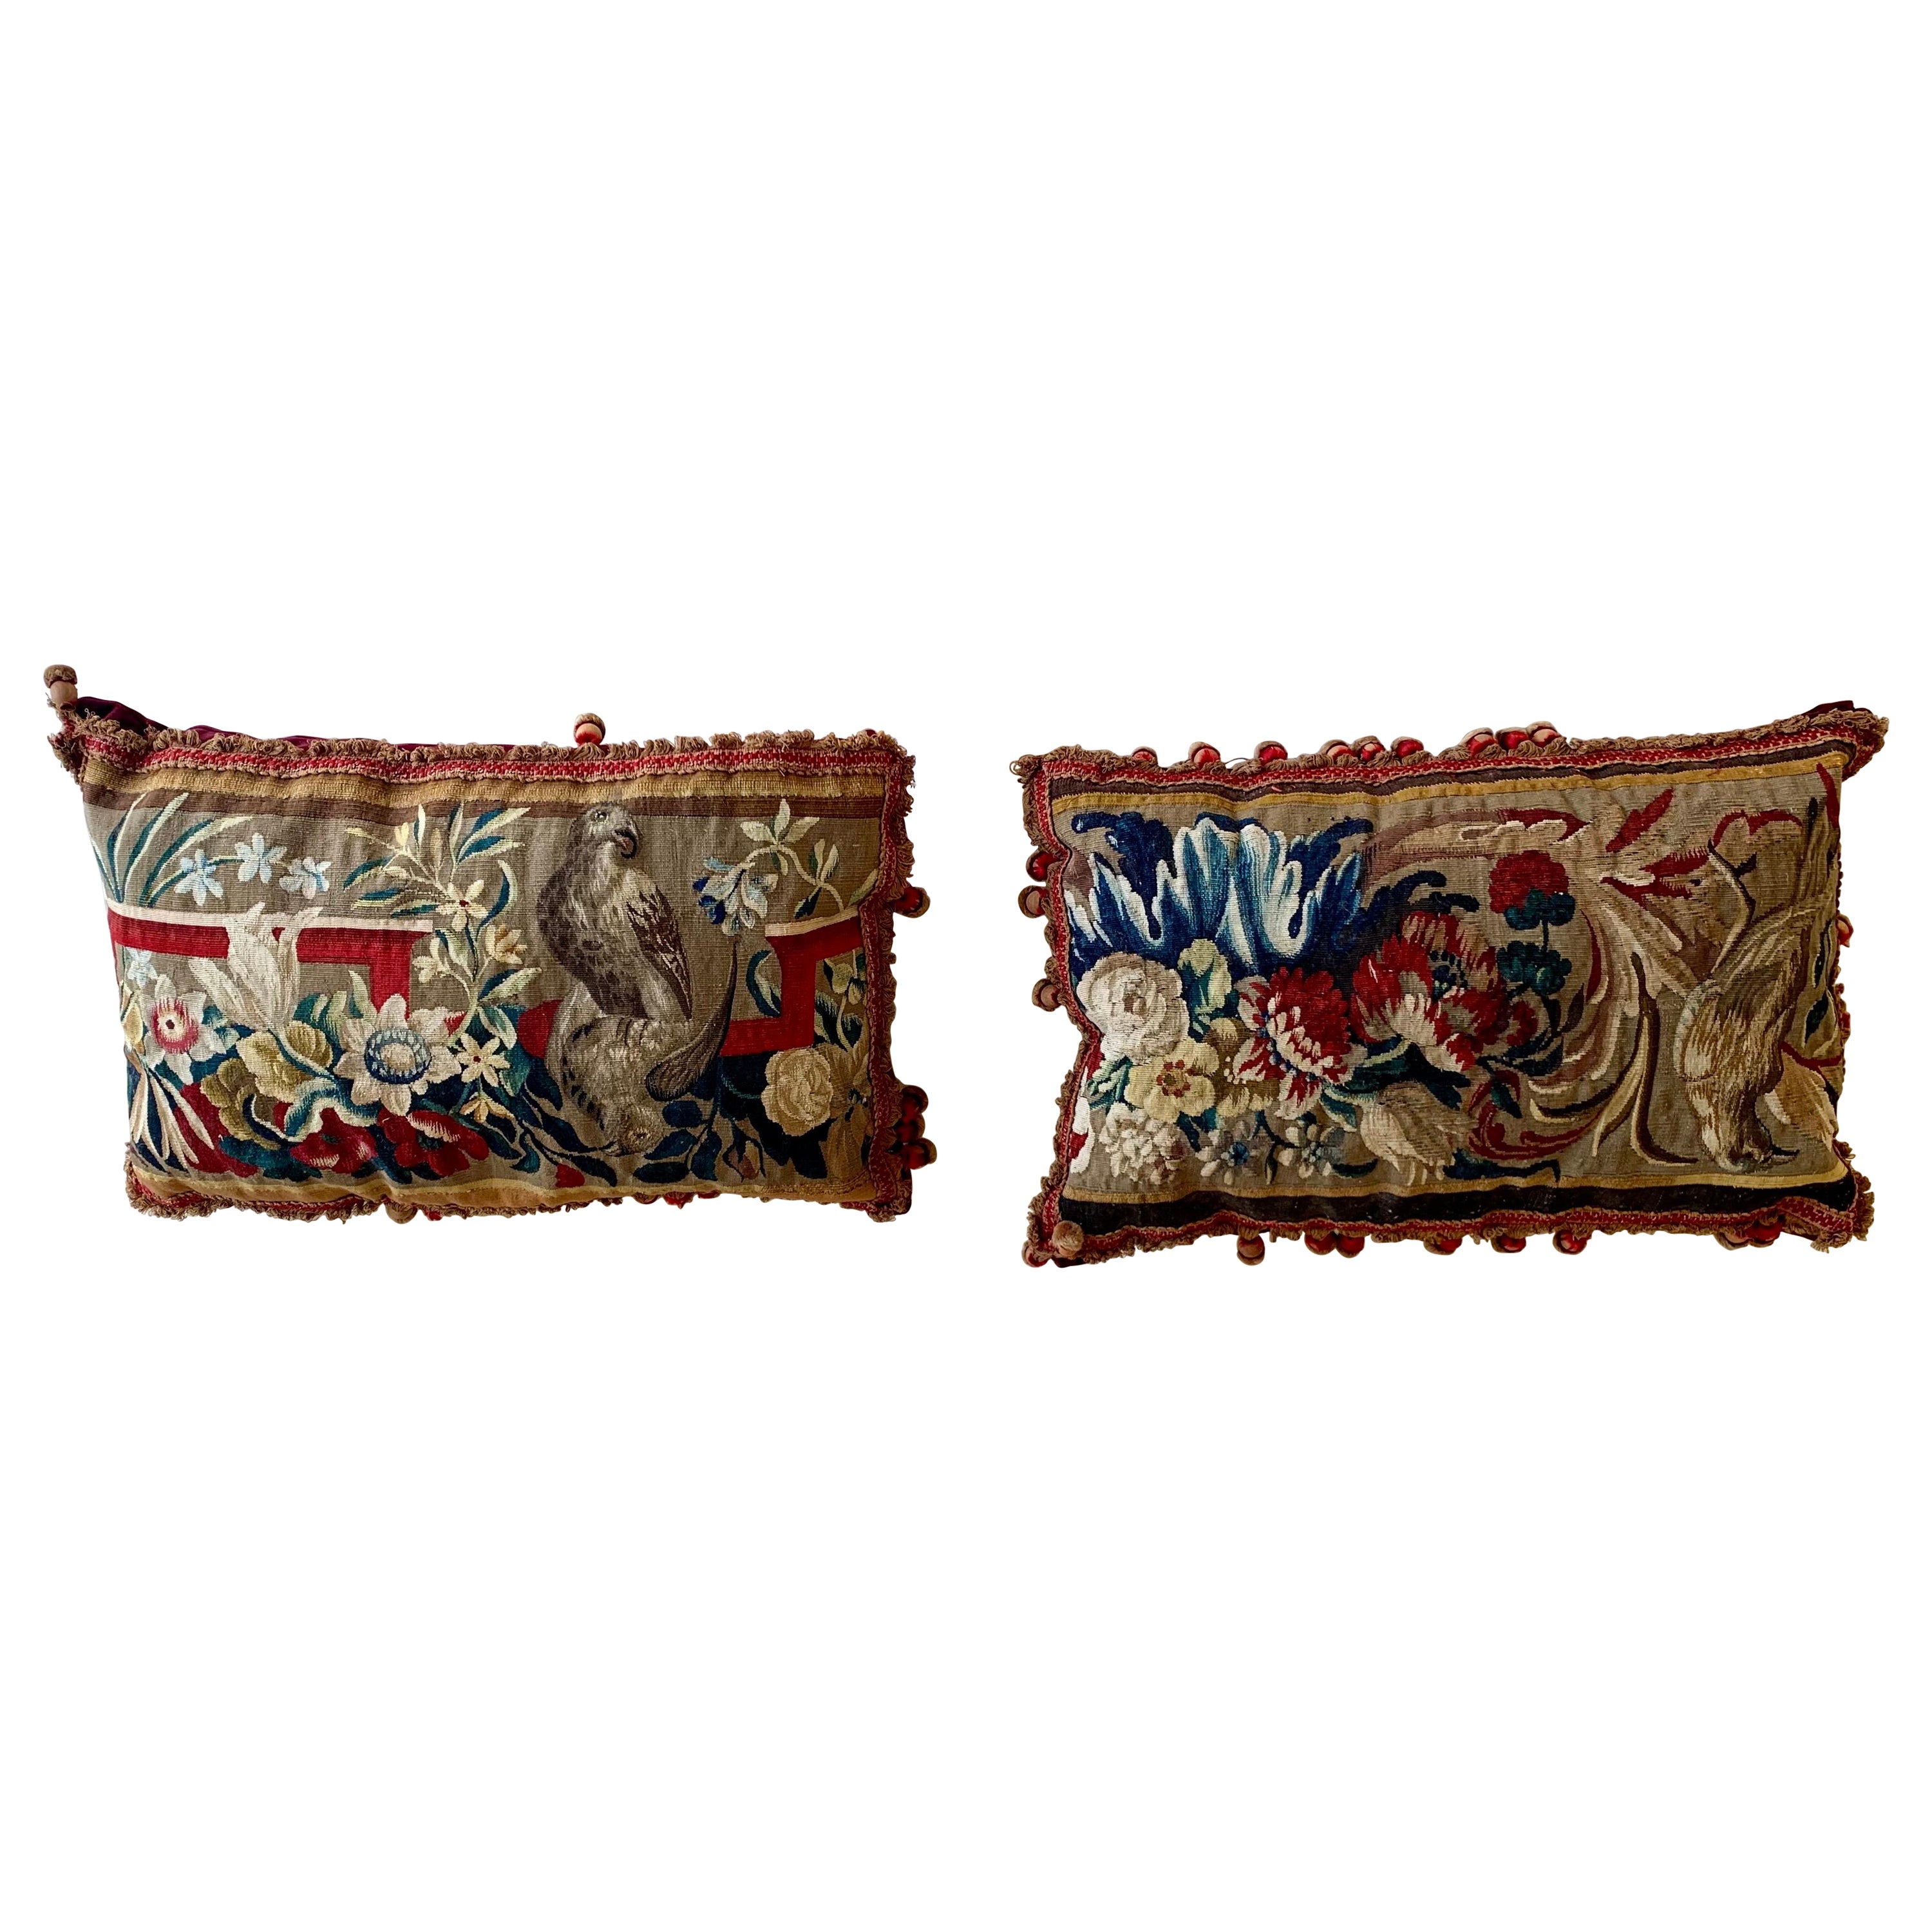 Pair of Shahkar Antique Pillows with Foliage and Petite Tassels